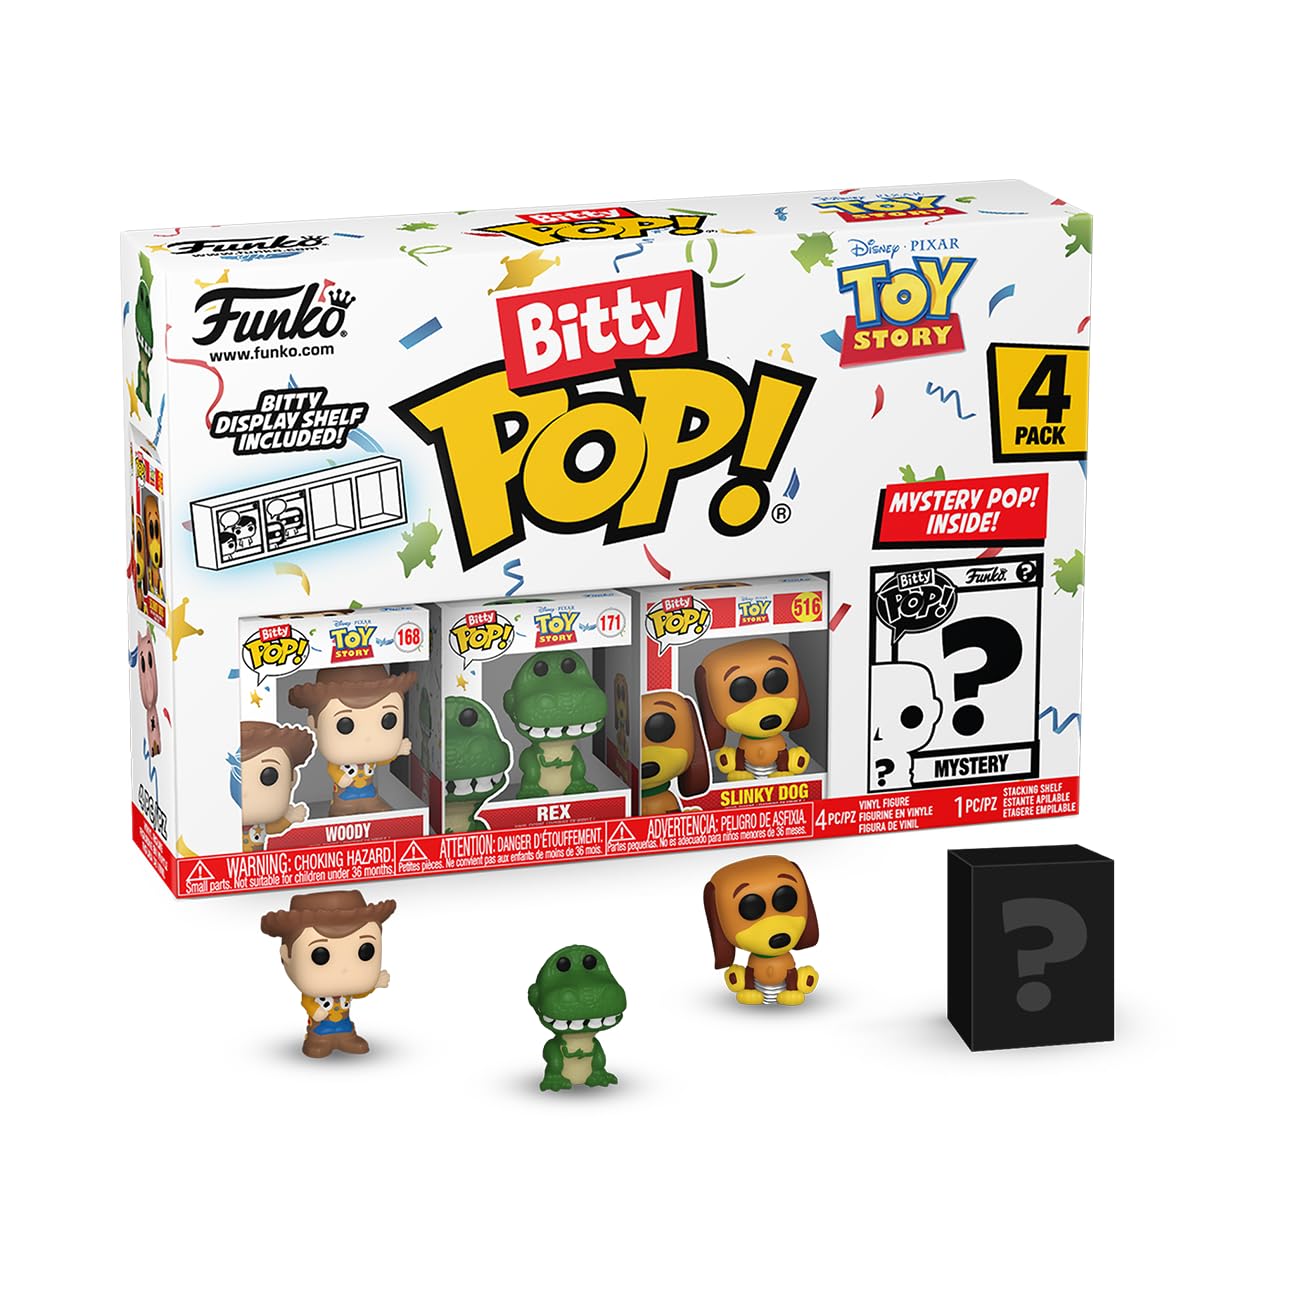 Funko Bitty Pop!: Toy Story Mini Collectible Toys - Woody, Rex, Slinky Dog & Mystery Chase Figure (Styles May Vary) 4-Pack